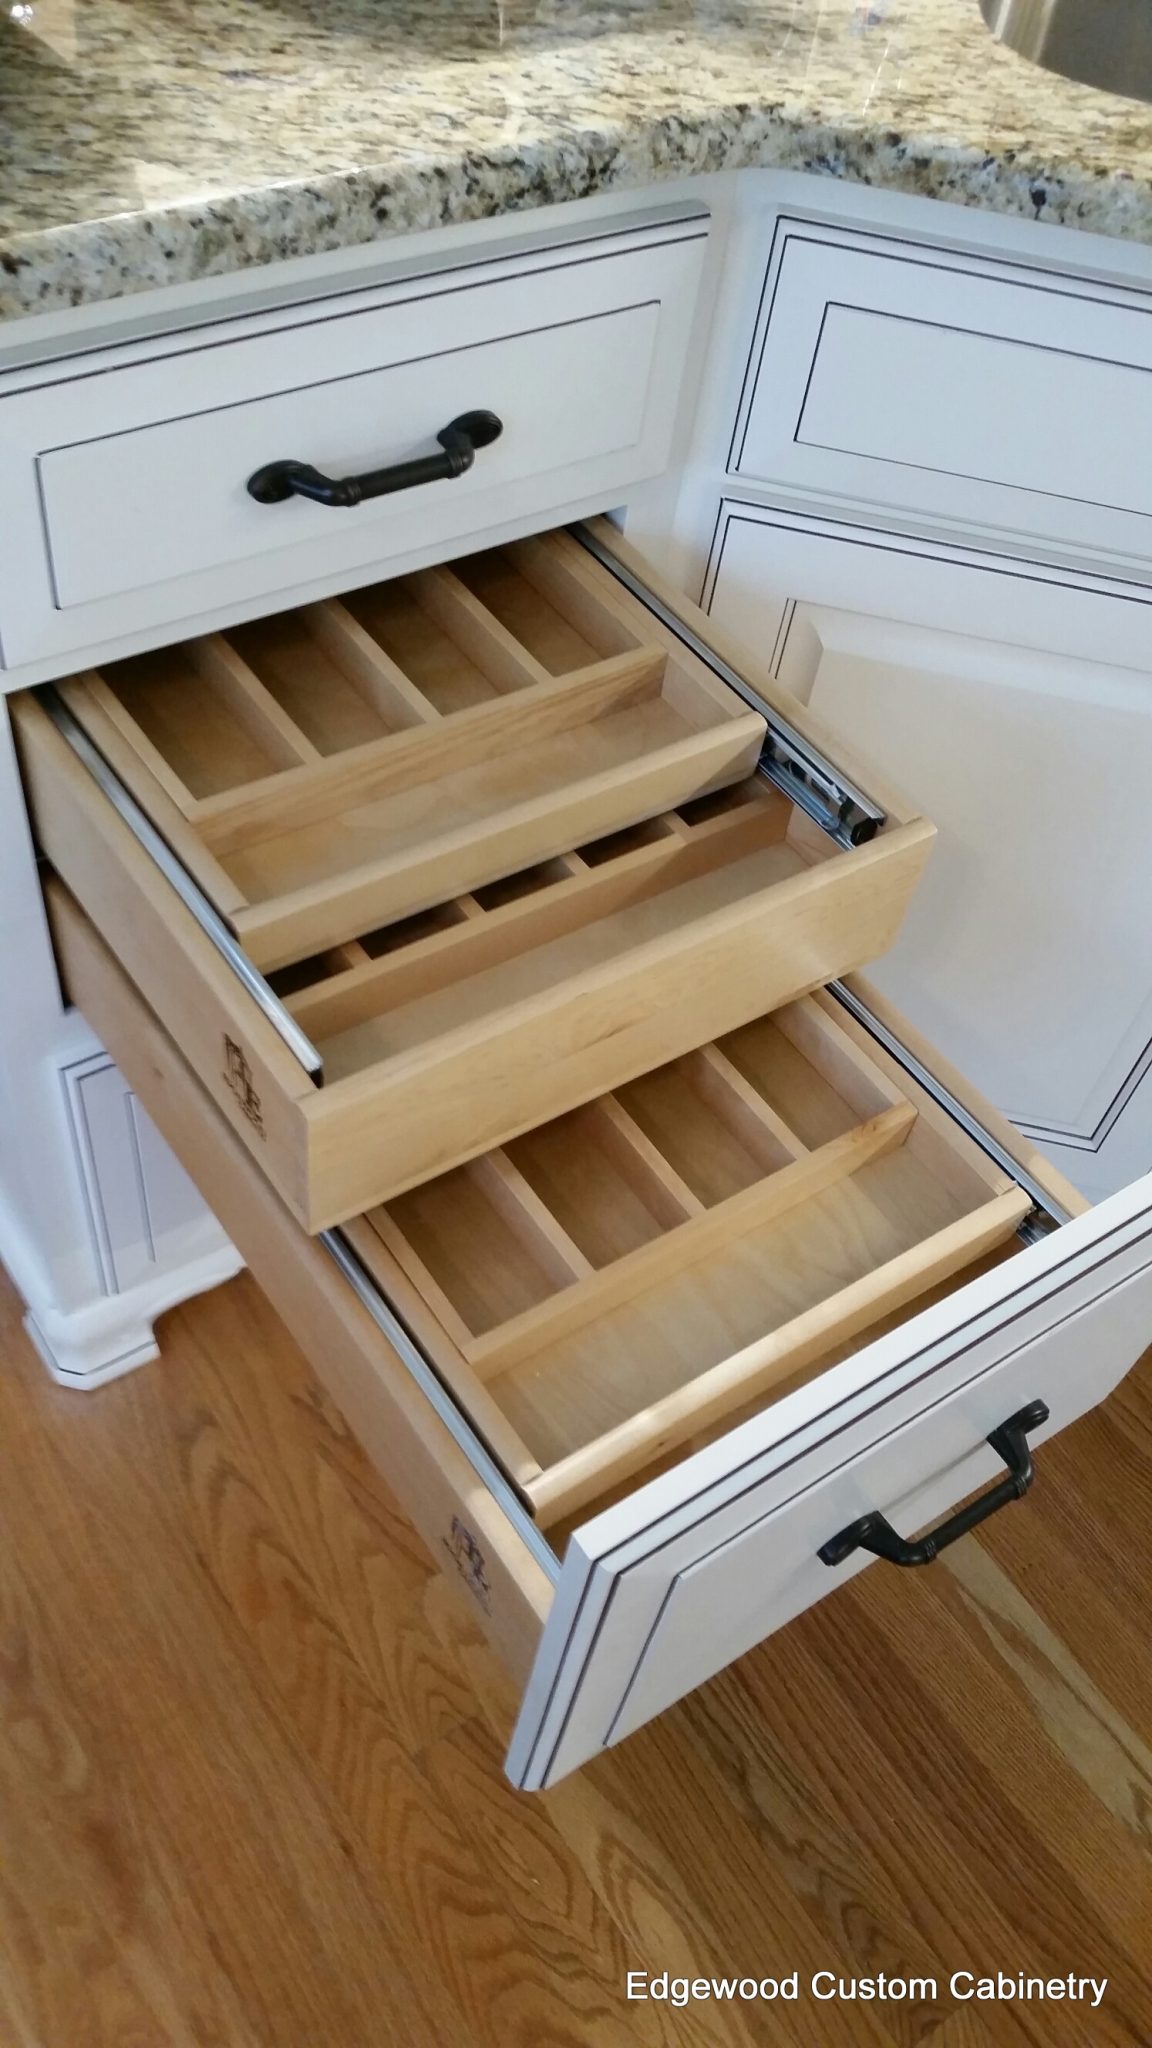 https://edgewoodcabinetry.com/wp-content/uploads/2014/06/edgewood-cabinetry-nestled-cutlery-drawer-doubled.jpg